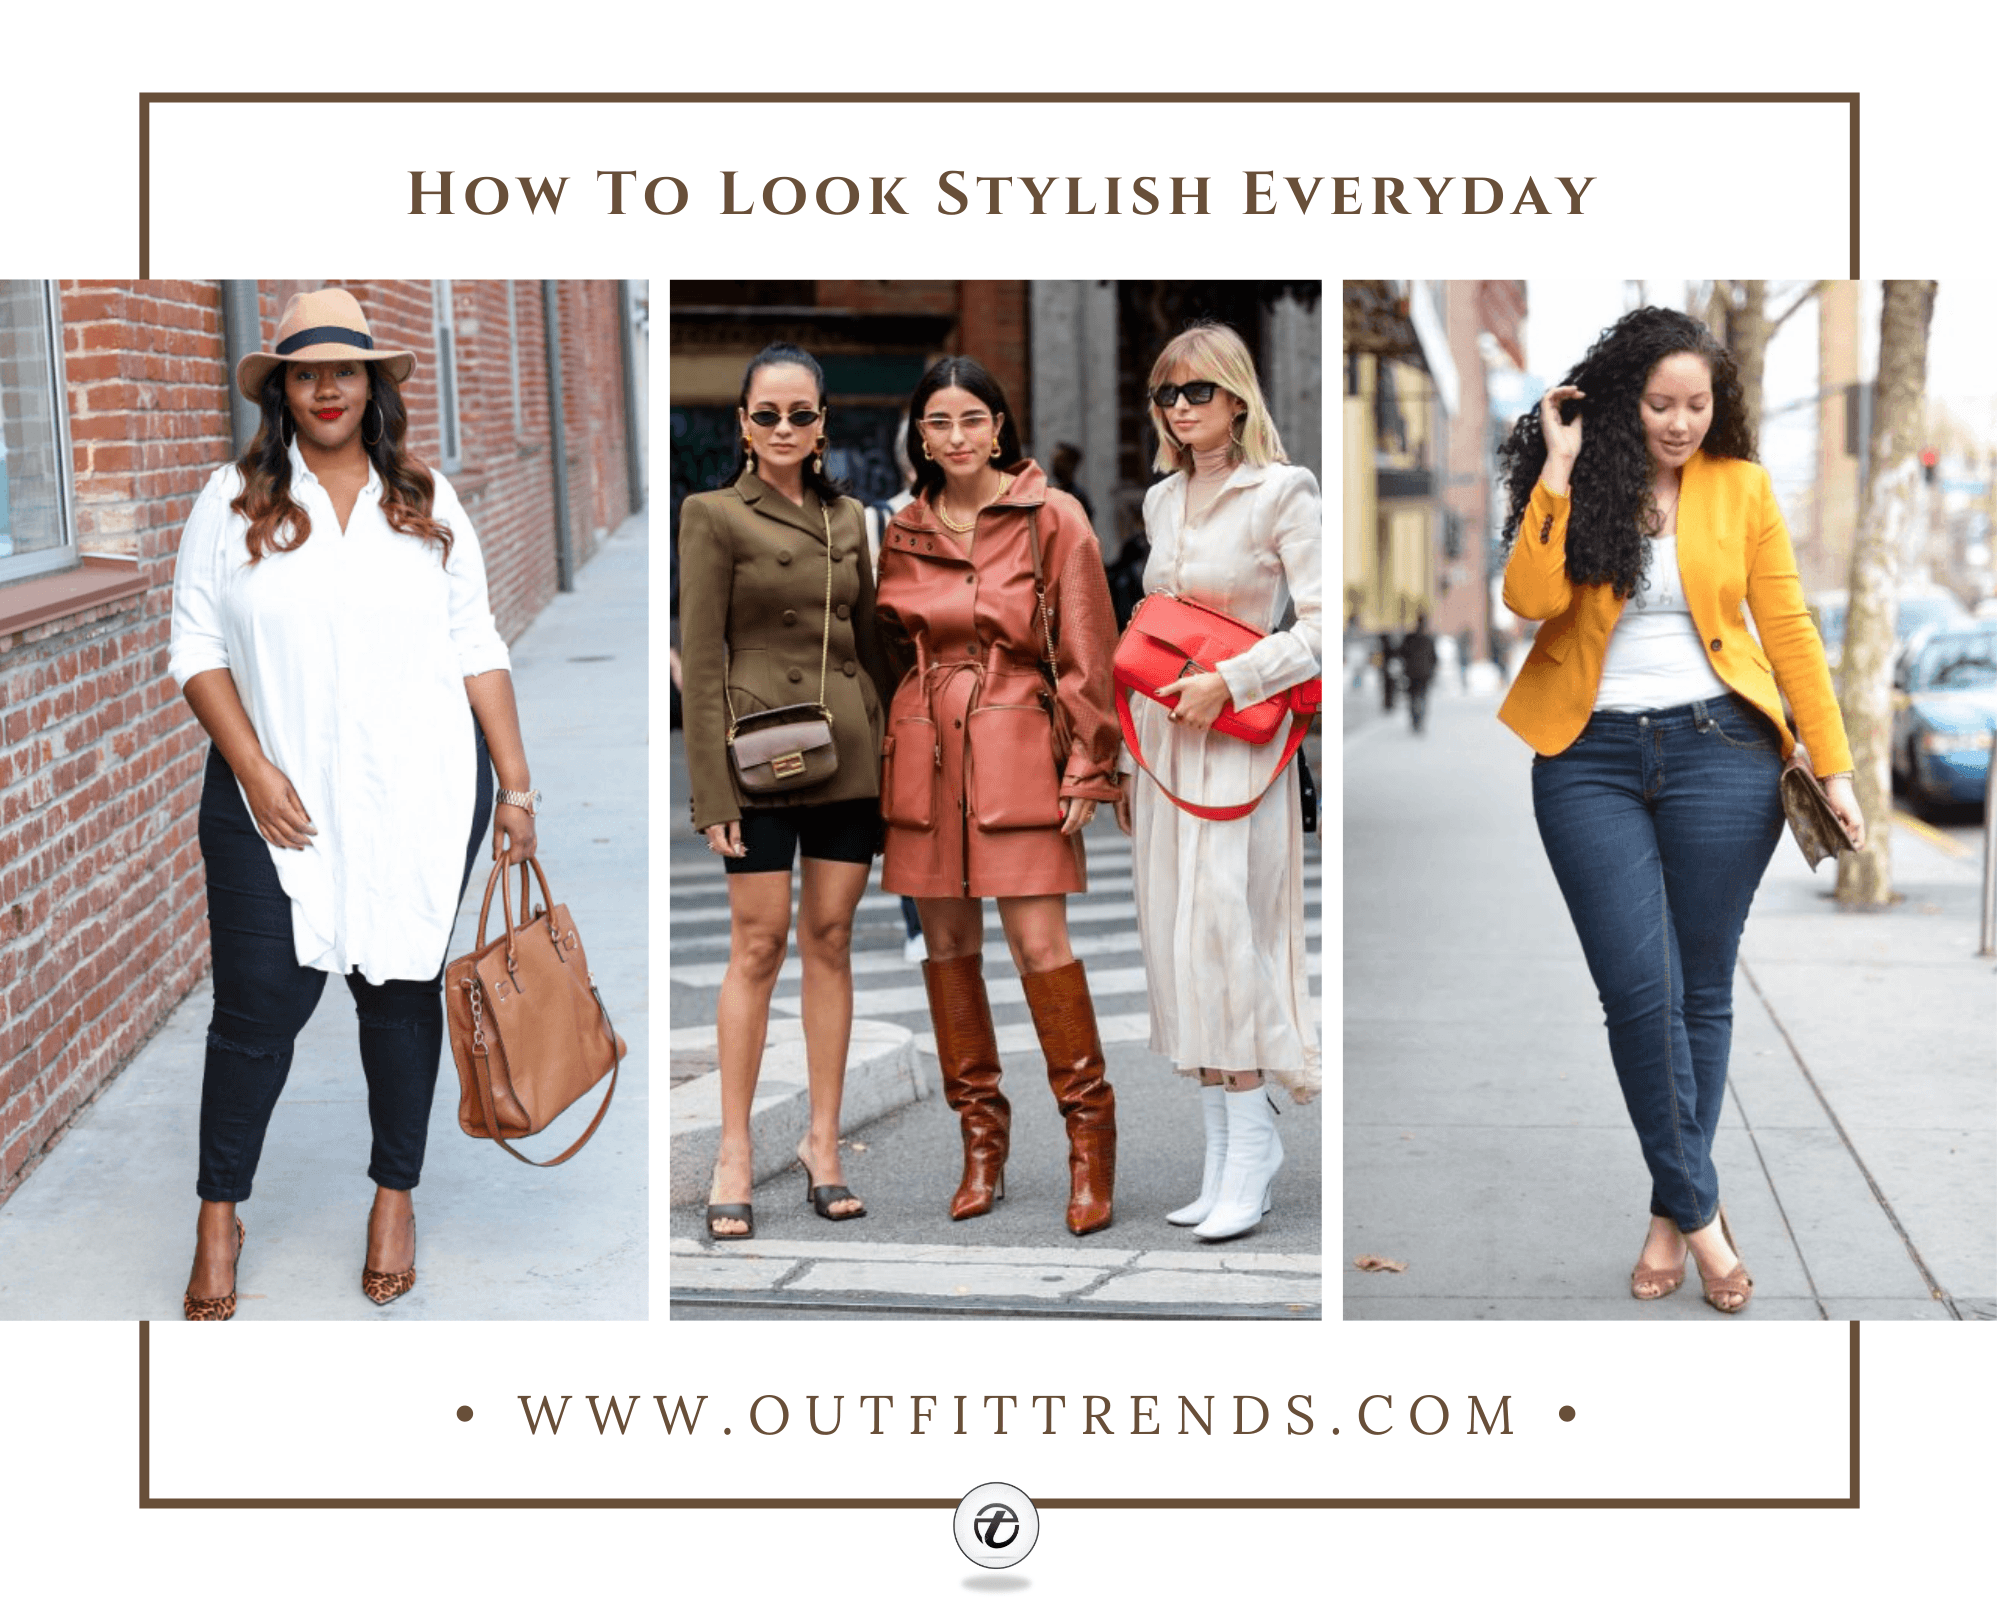 How to Look Stylish | 15 Simple Tips for Girls to Look Fashionable